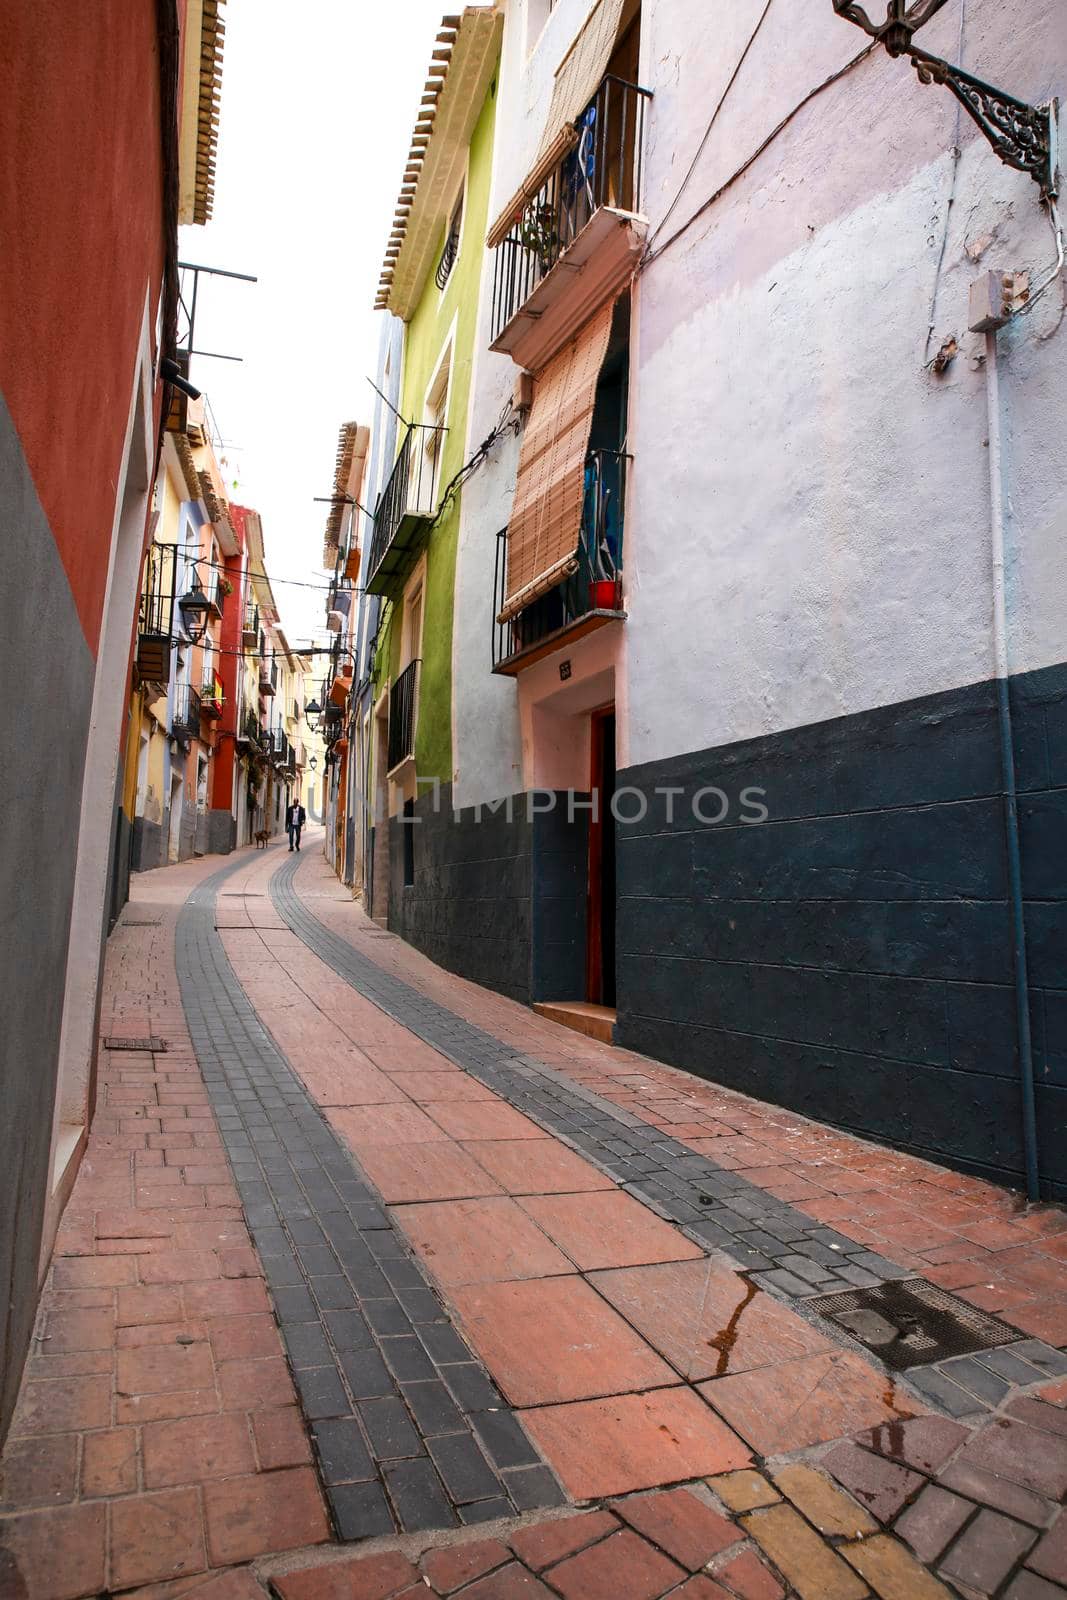 Narrow cobbled street and colorful facades in Villajoyosa town by soniabonet